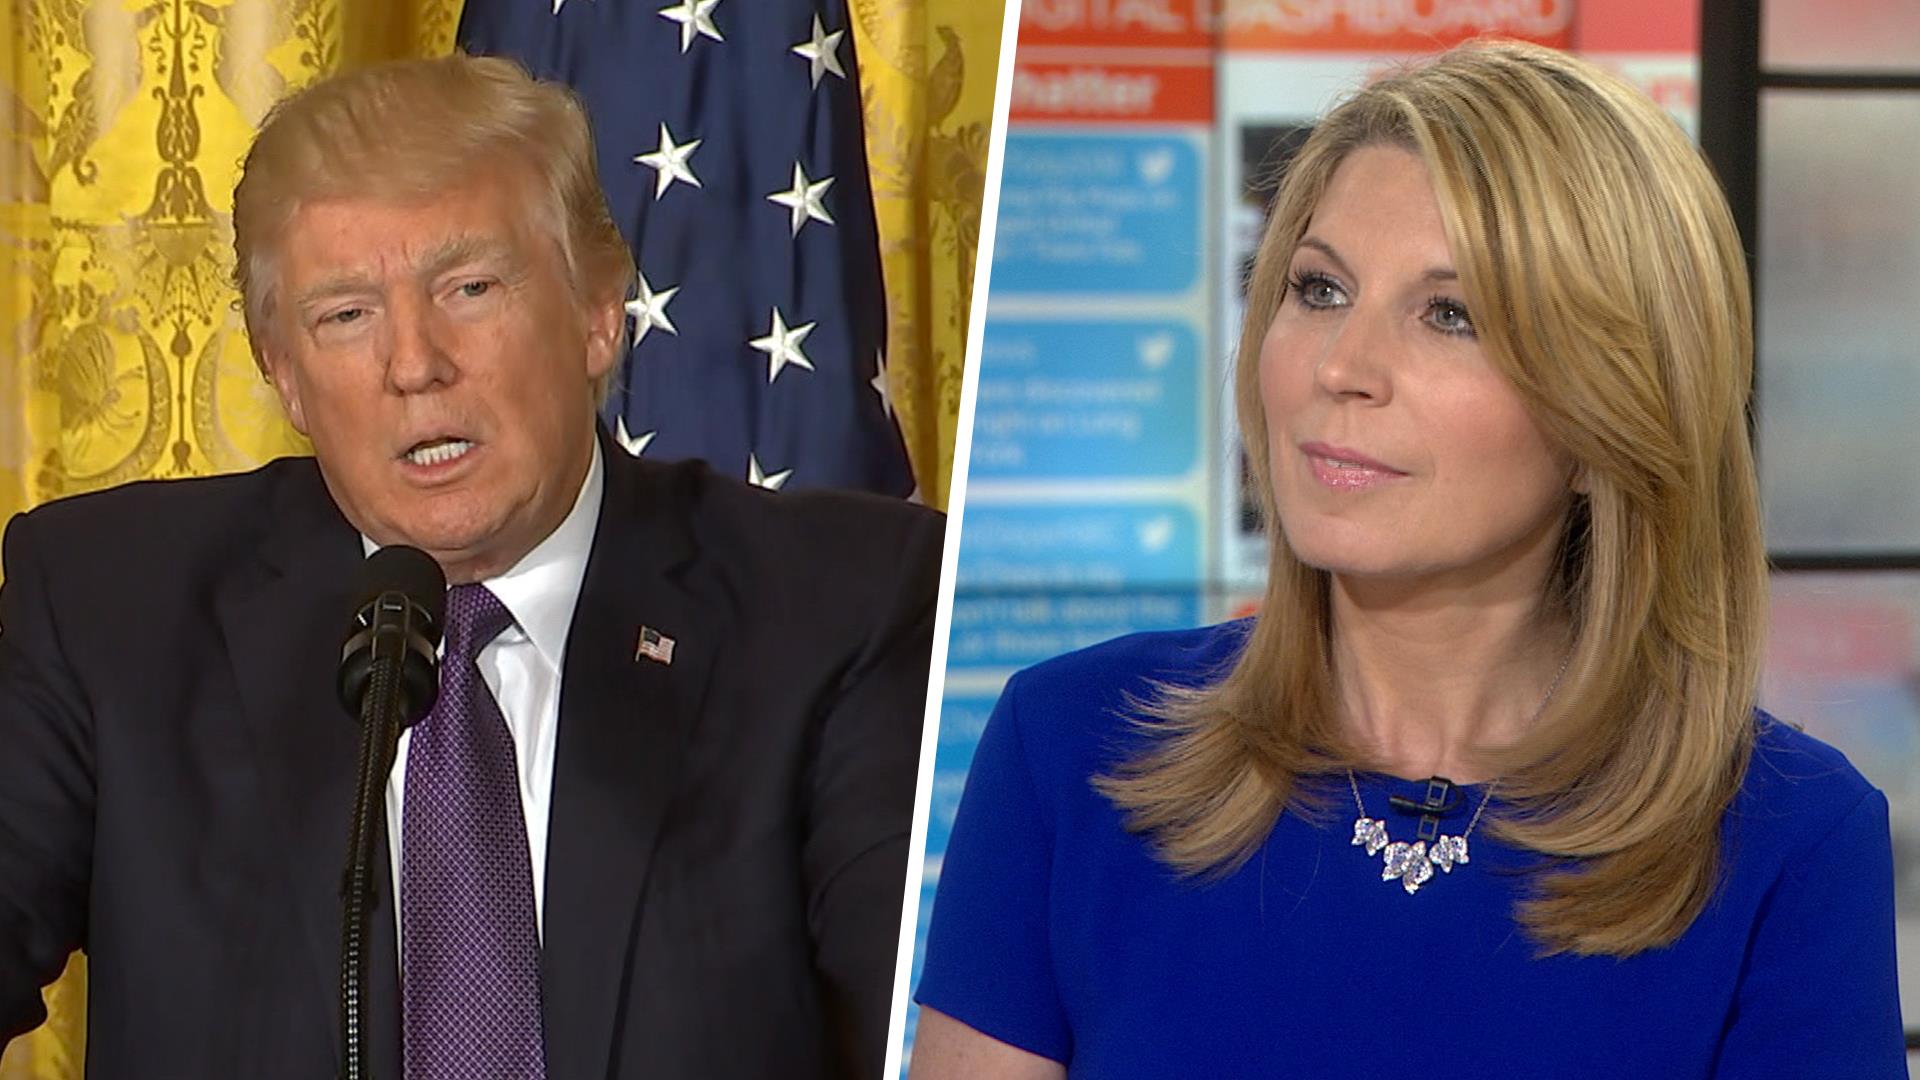 Political analyst Nicolle Wallace tells TODAY that as President Trump modif...